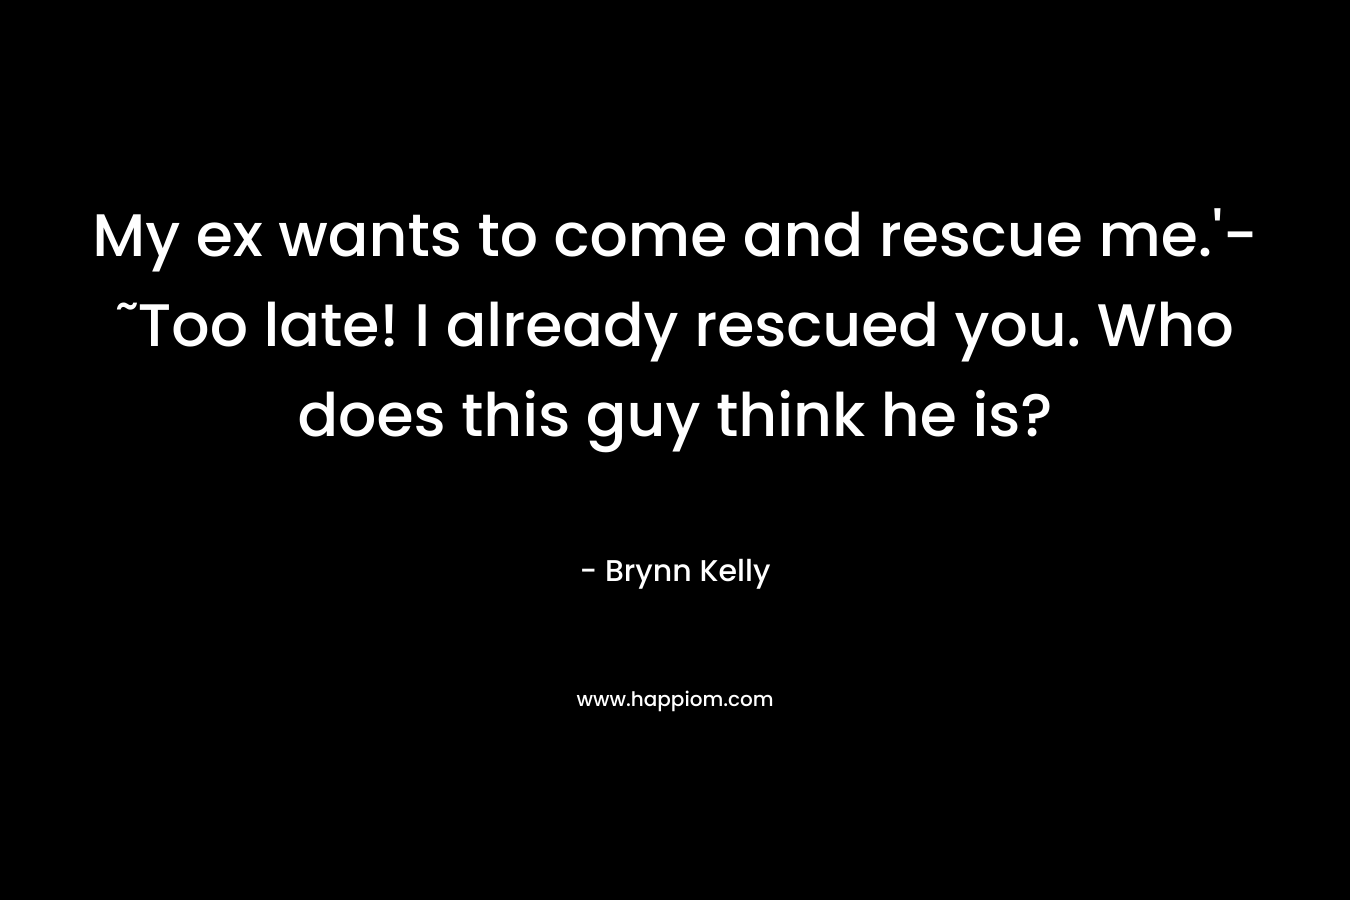 My ex wants to come and rescue me.'-˜Too late! I already rescued you. Who does this guy think he is?